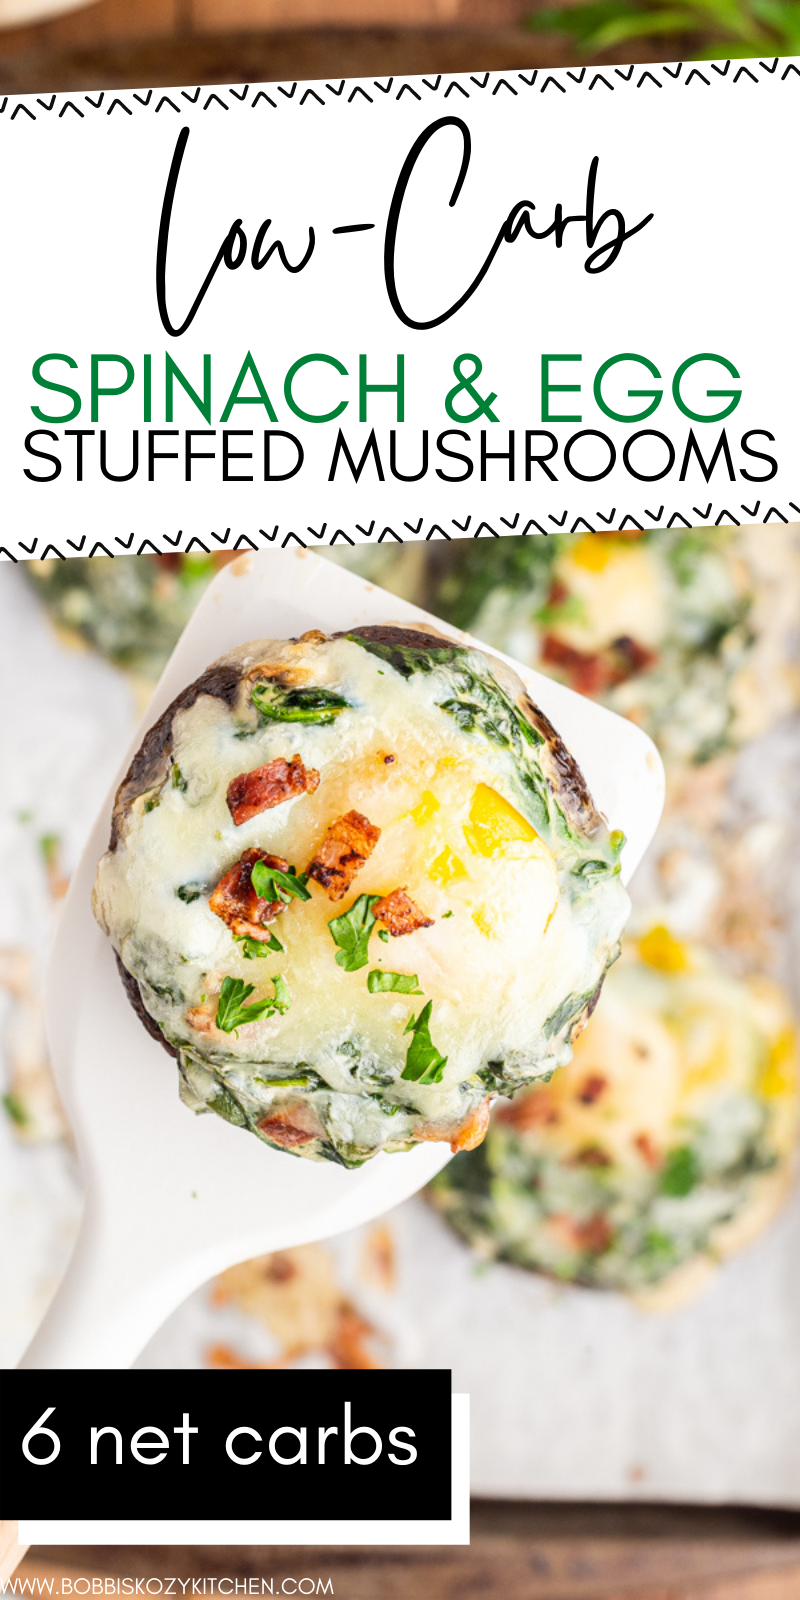 Keto Spinach and Egg Stuffed Mushrooms - These spinach and egg stuffed portobello mushrooms are an amazingly easy, and delicious, way to impress your friends and family. Perfect for breakfast. brunch, or even a light dinner, they are gluten-free, low carb, and packed with proteins. #keto #lowcarb #glutenfree #spinach #eggs #mushroom #cheese #breakfast #brunch #recipe